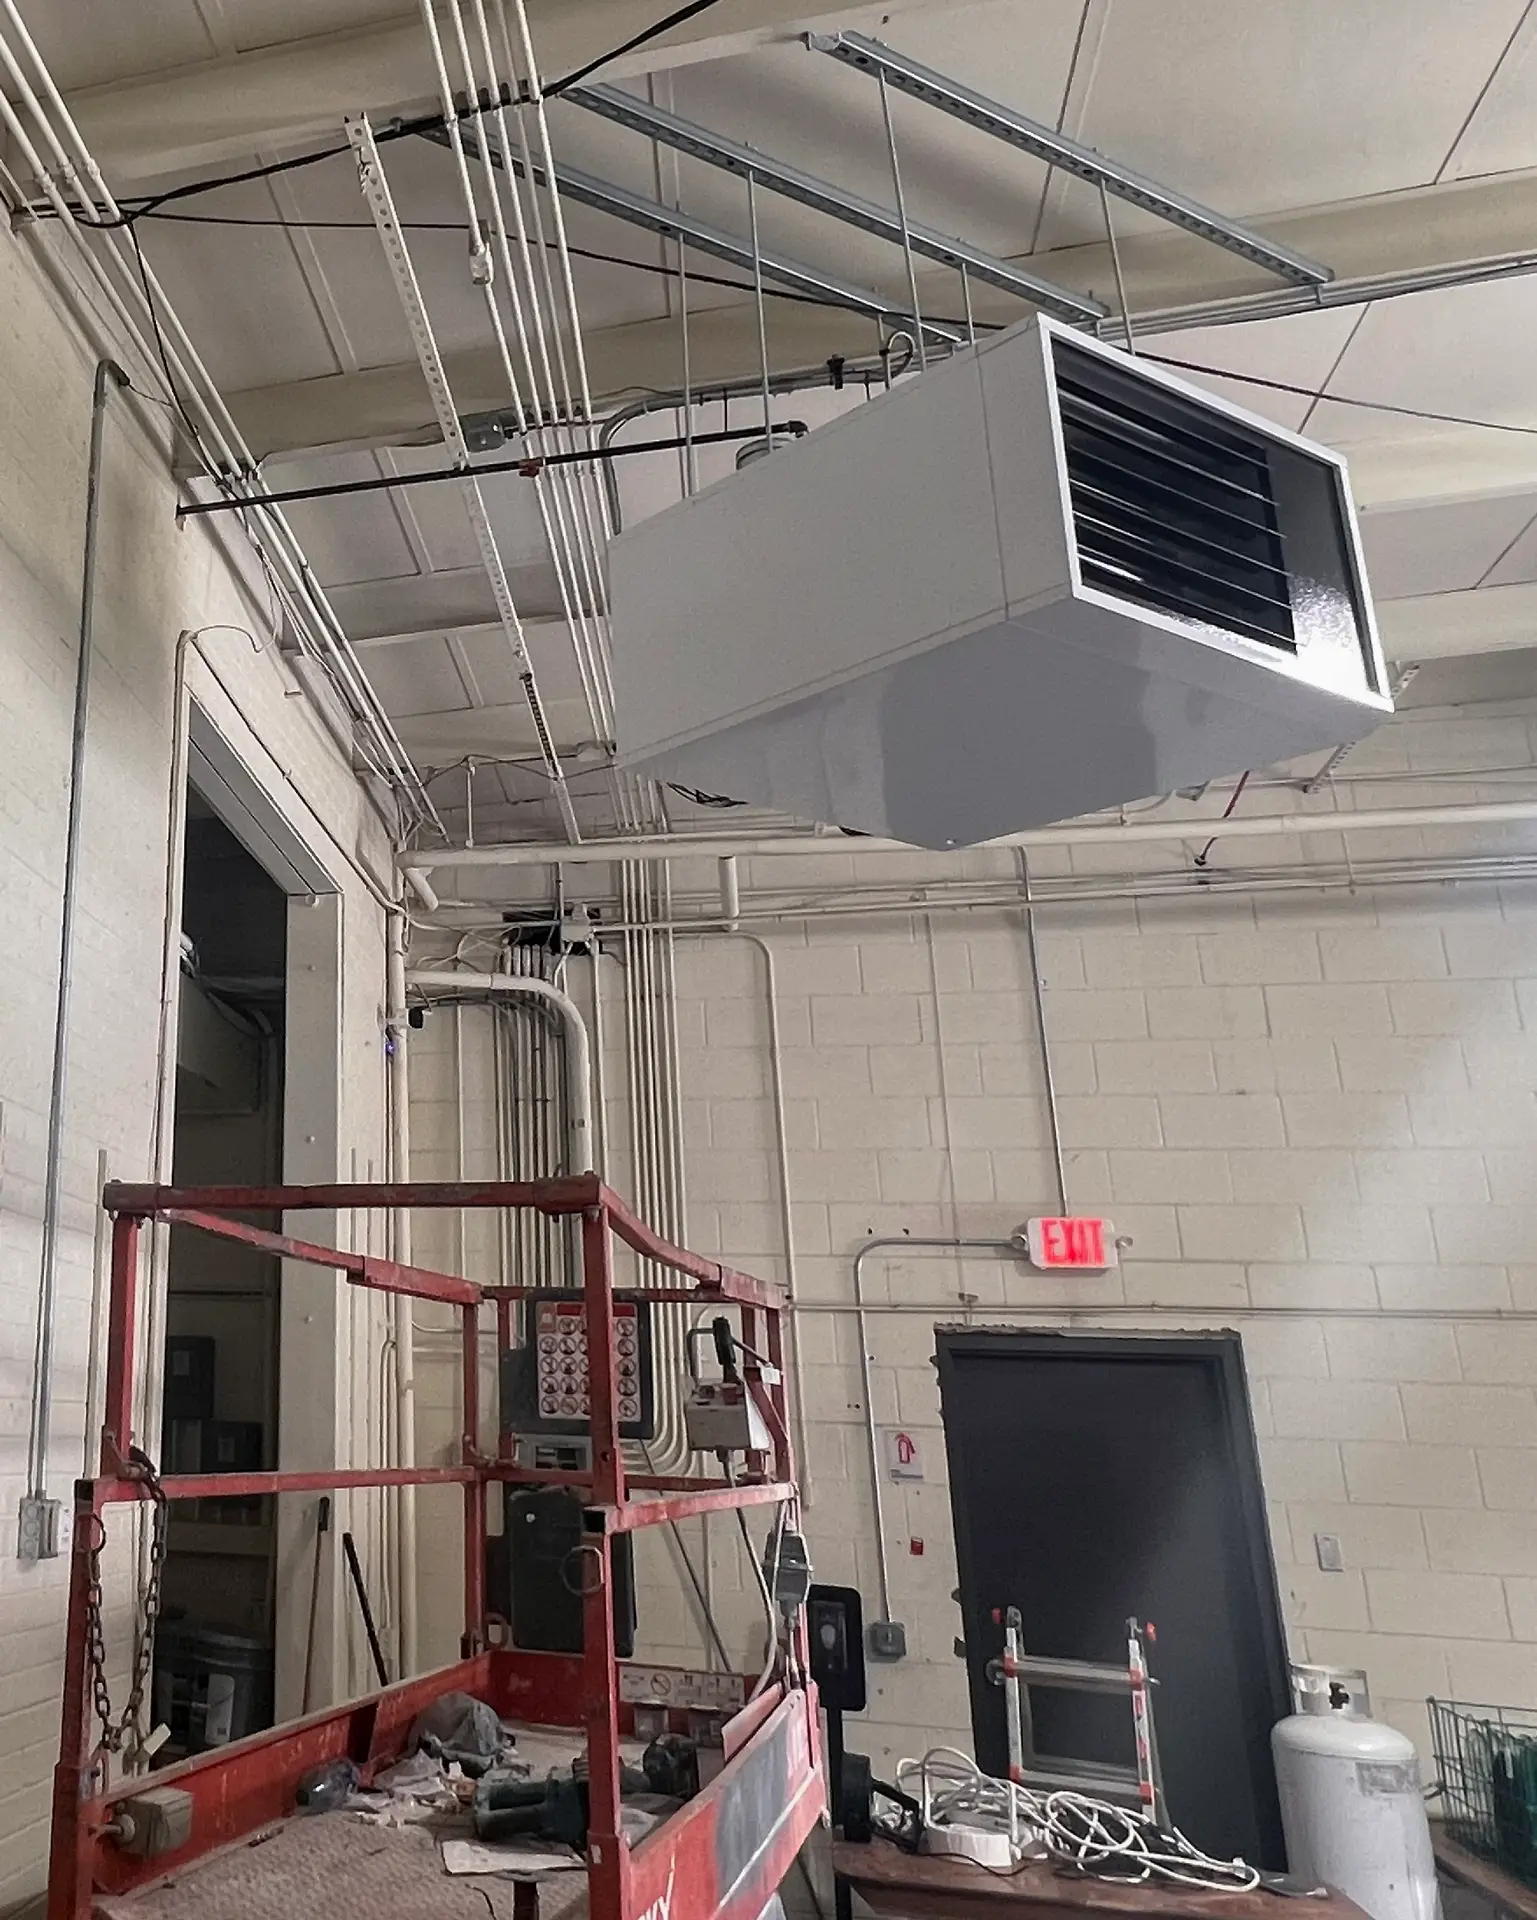 Commercial Heating and Cooling system hanging from the ceiling of an industrial building